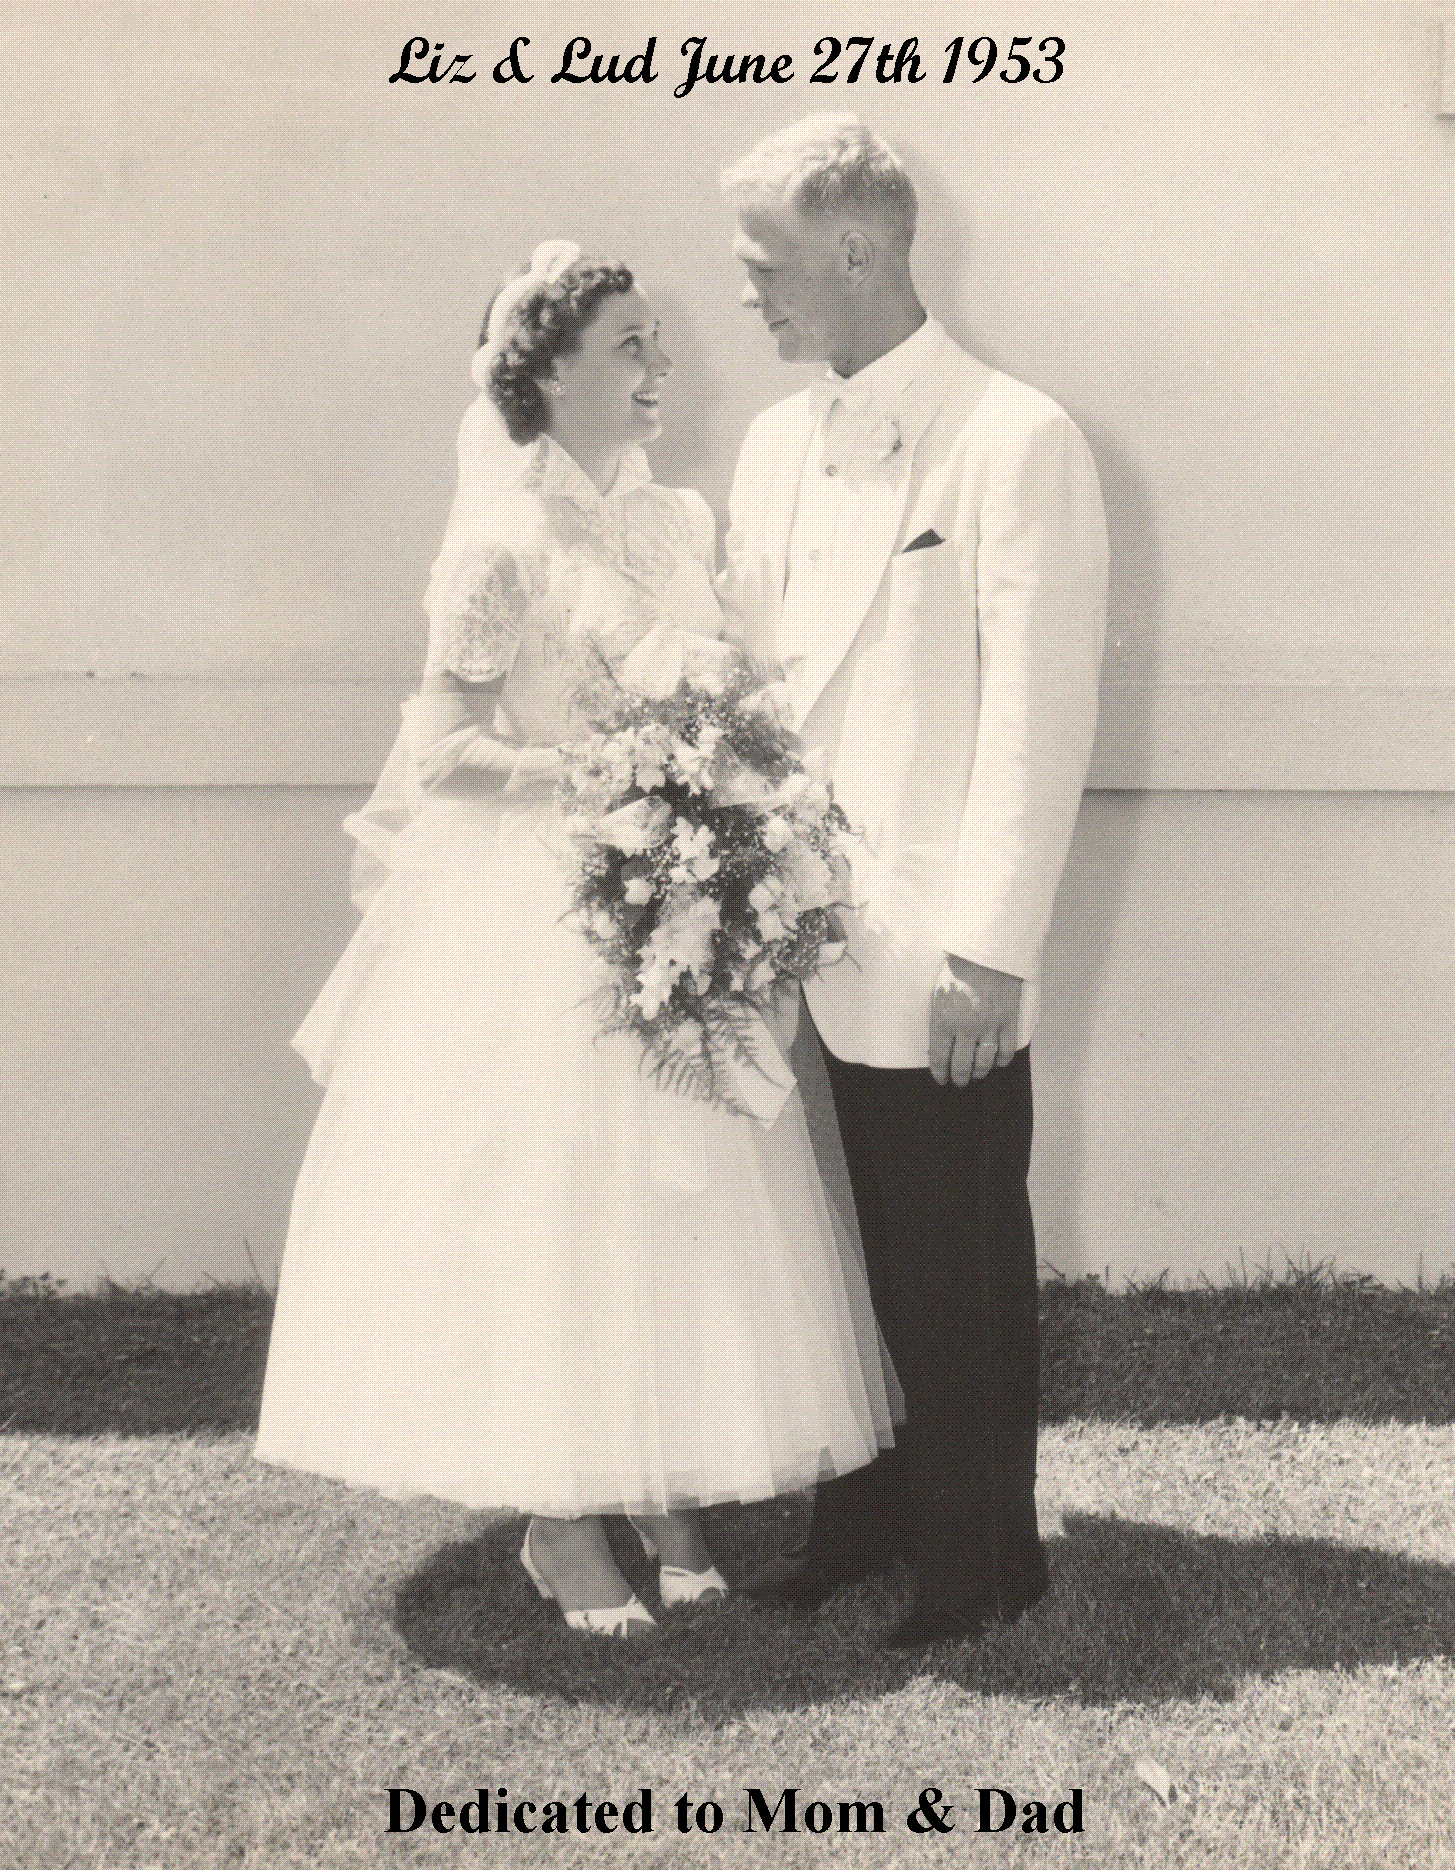 Mom and Dad's wedding